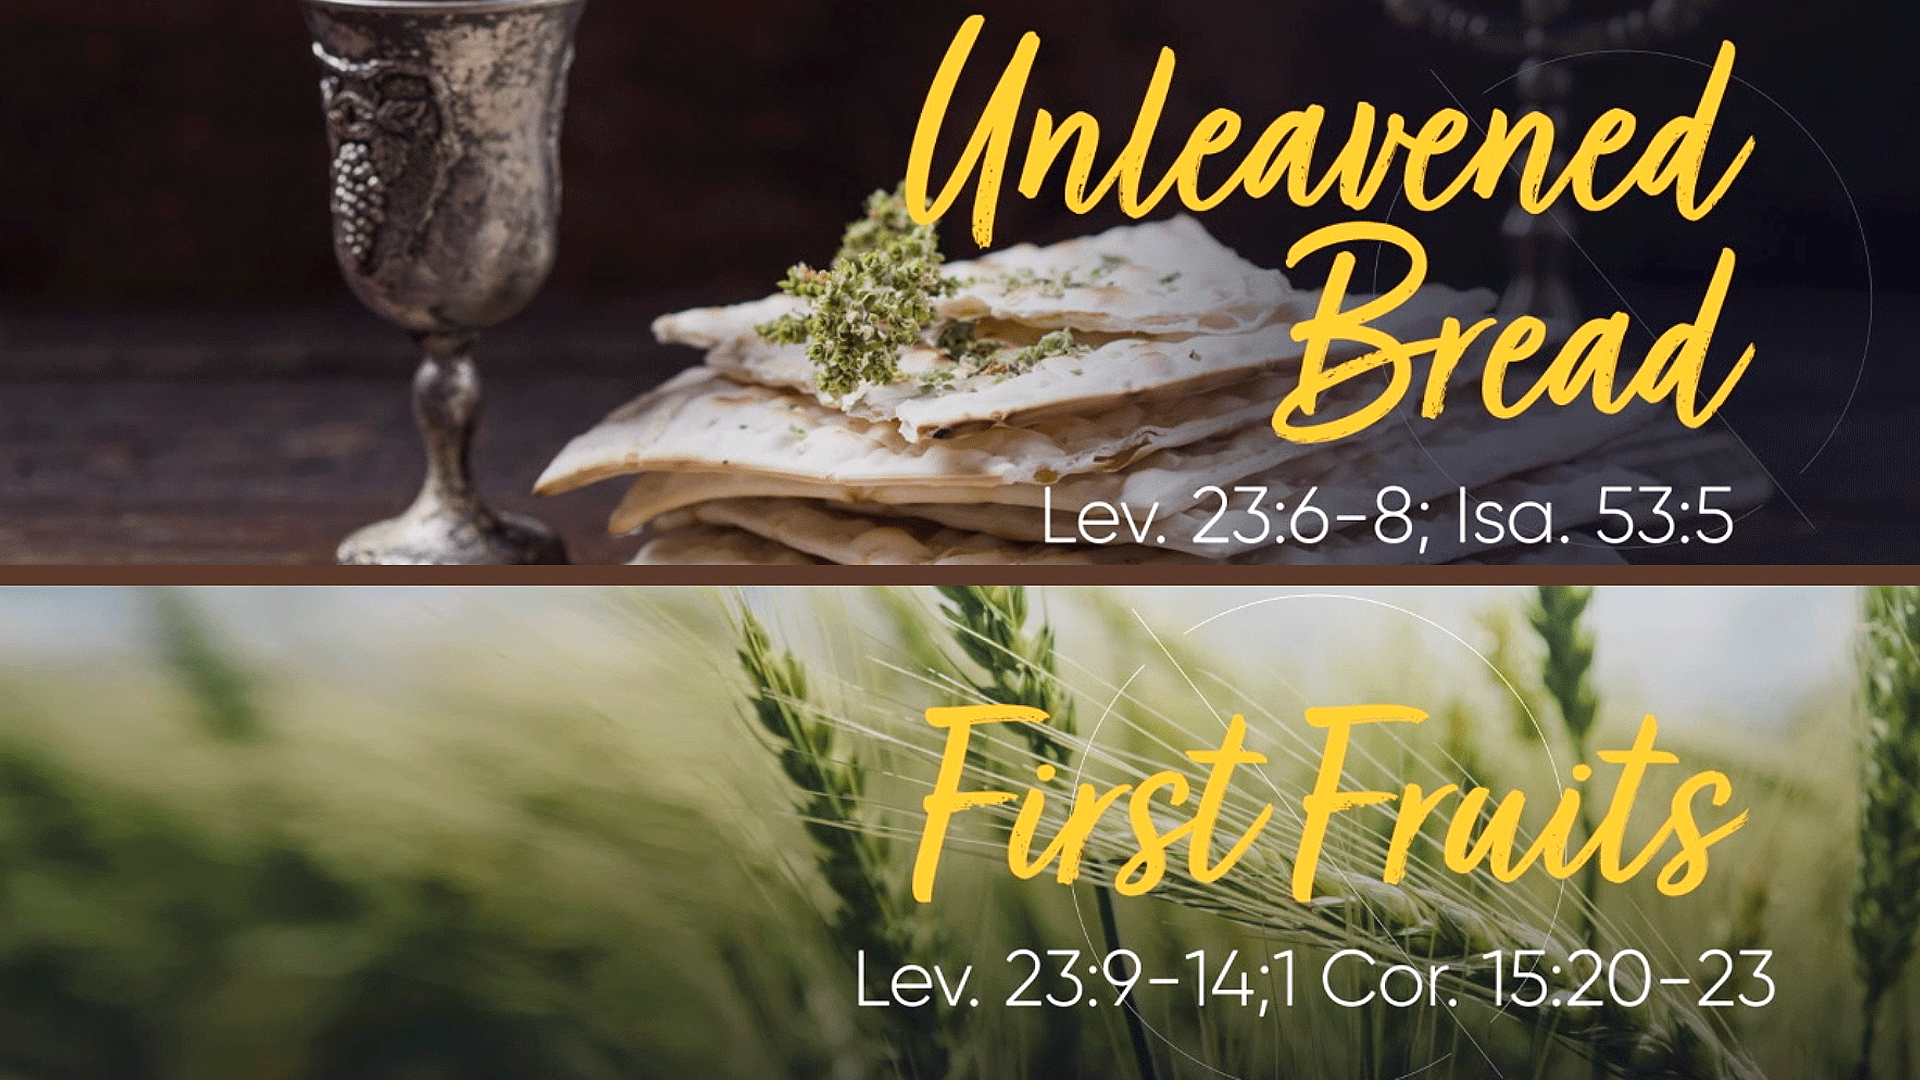 The Jewish Feasts of Unleavened Bread and First Fruits